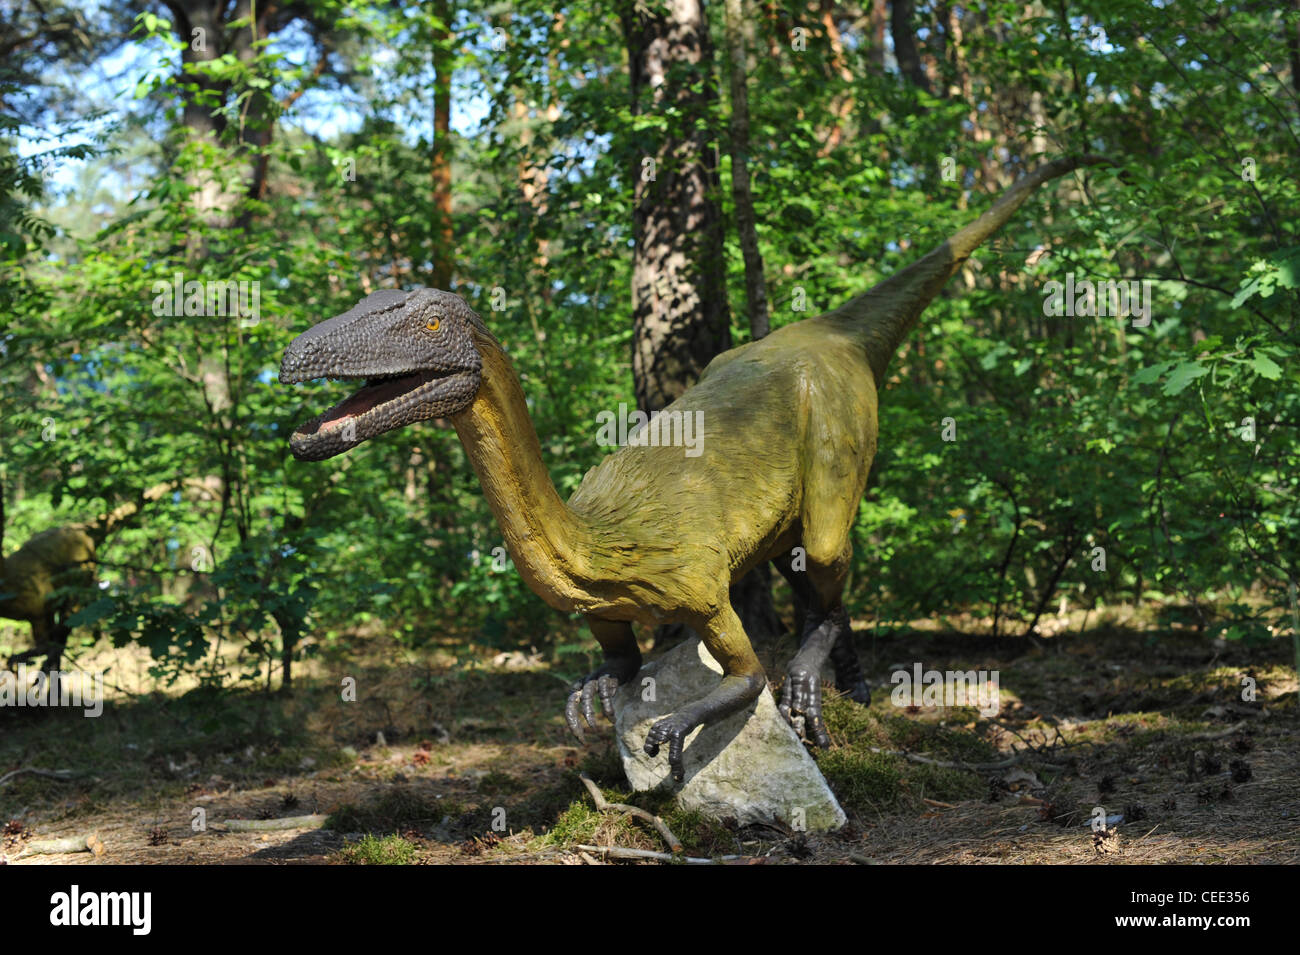 Life size statue of a velociraptor in forest scenery Stock Photo